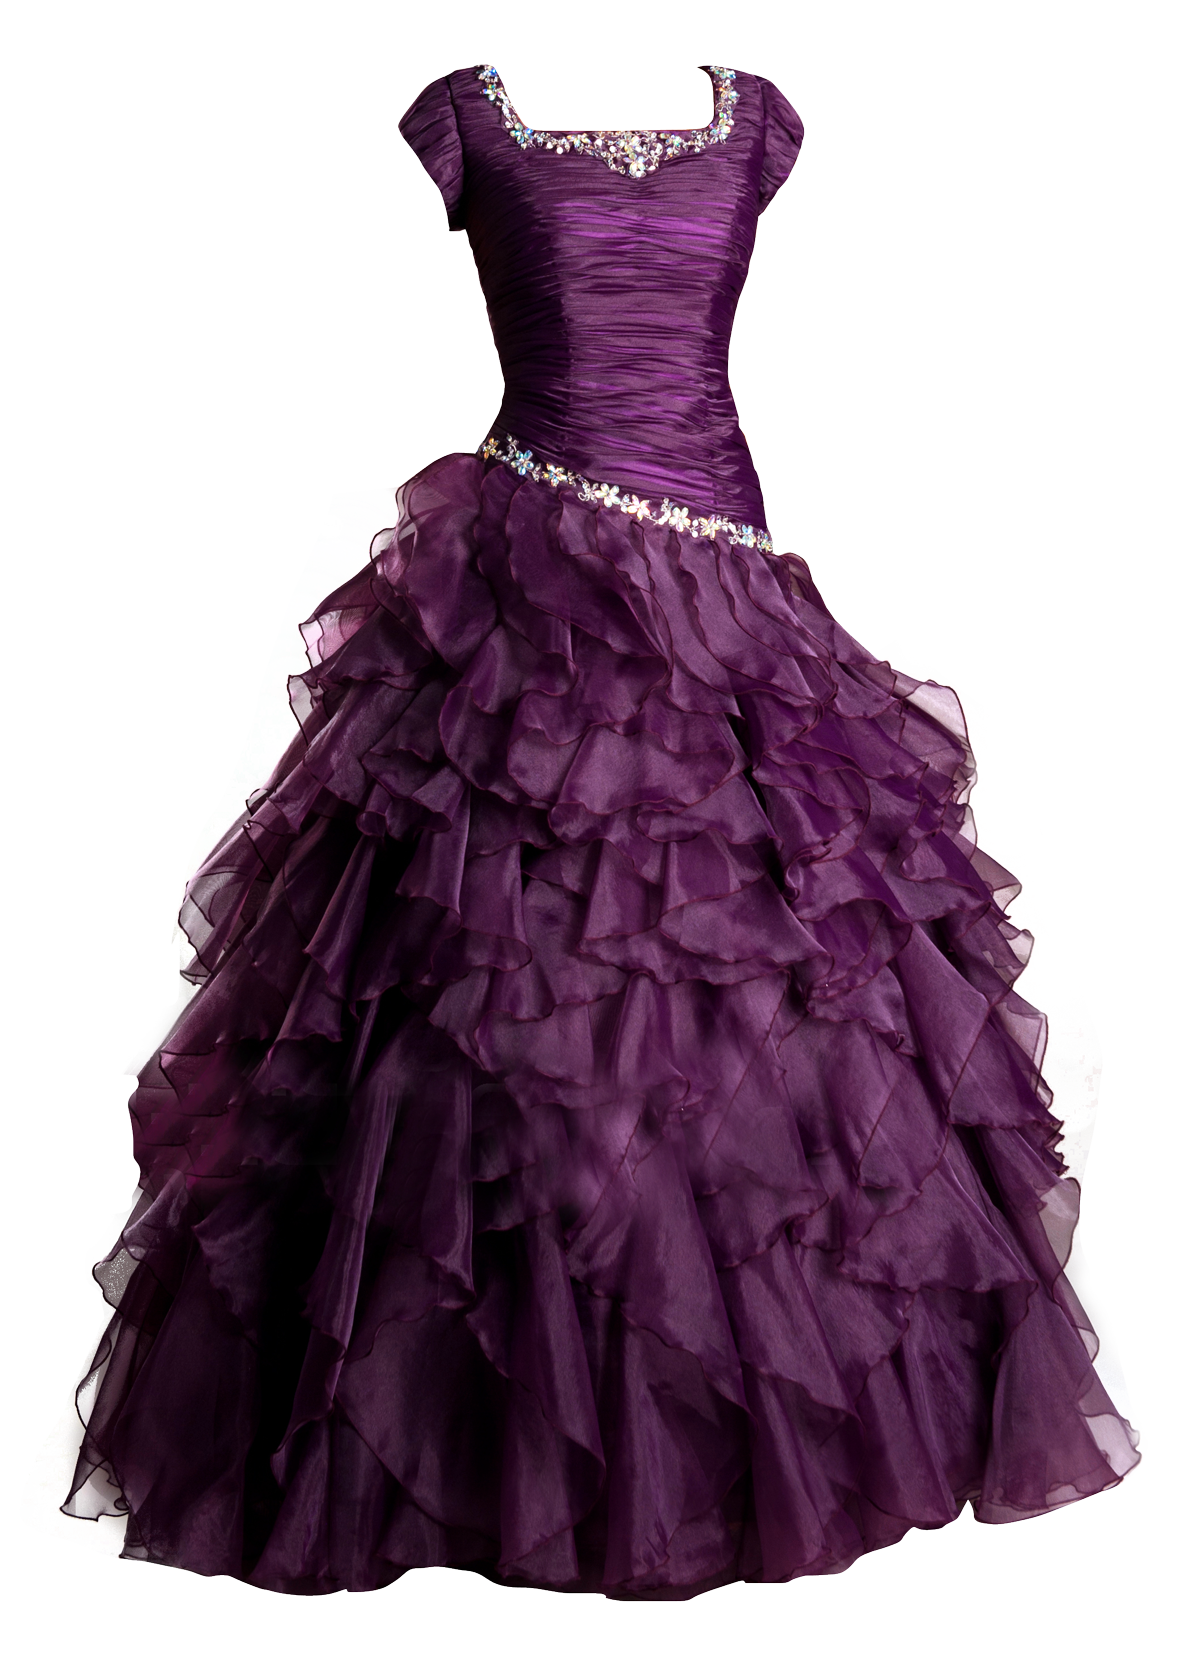 Gown-16 png by AvalonsInspirational on DeviantArt